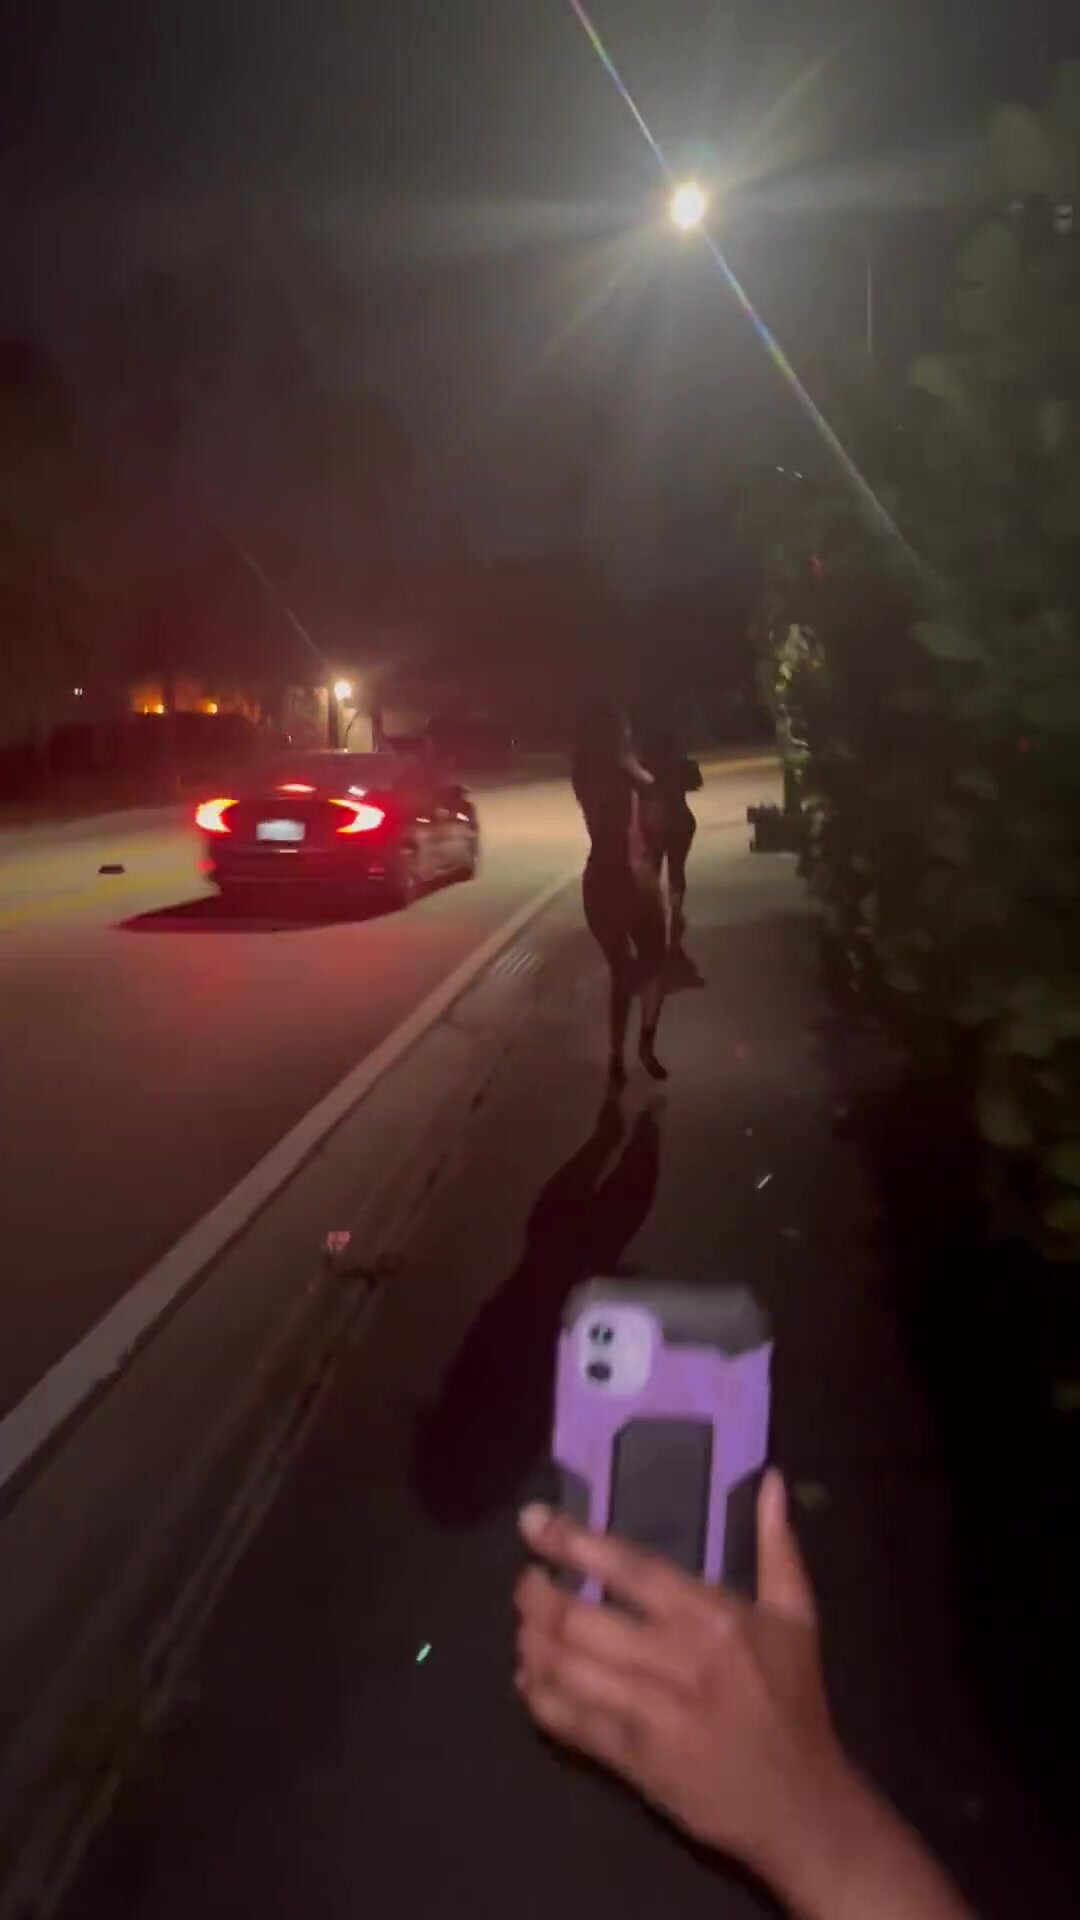 Florida thots film thmslvs on night-time naked stroll pic